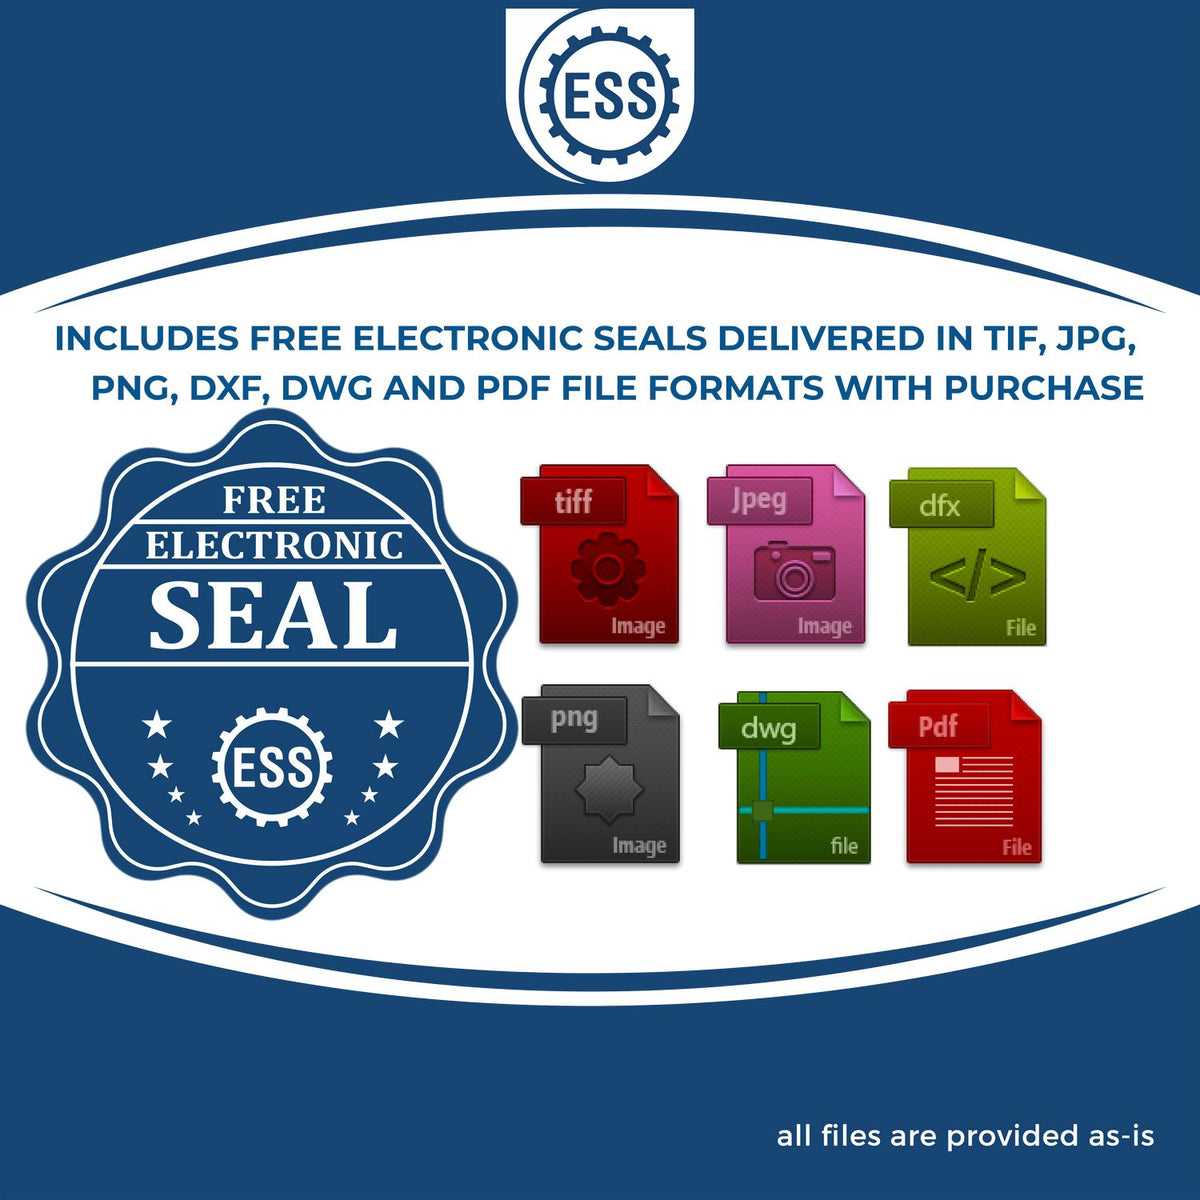 An infographic for the free electronic seal for the Gift Oregon Geologist Seal illustrating the different file type icons such as DXF, DWG, TIF, JPG and PNG.